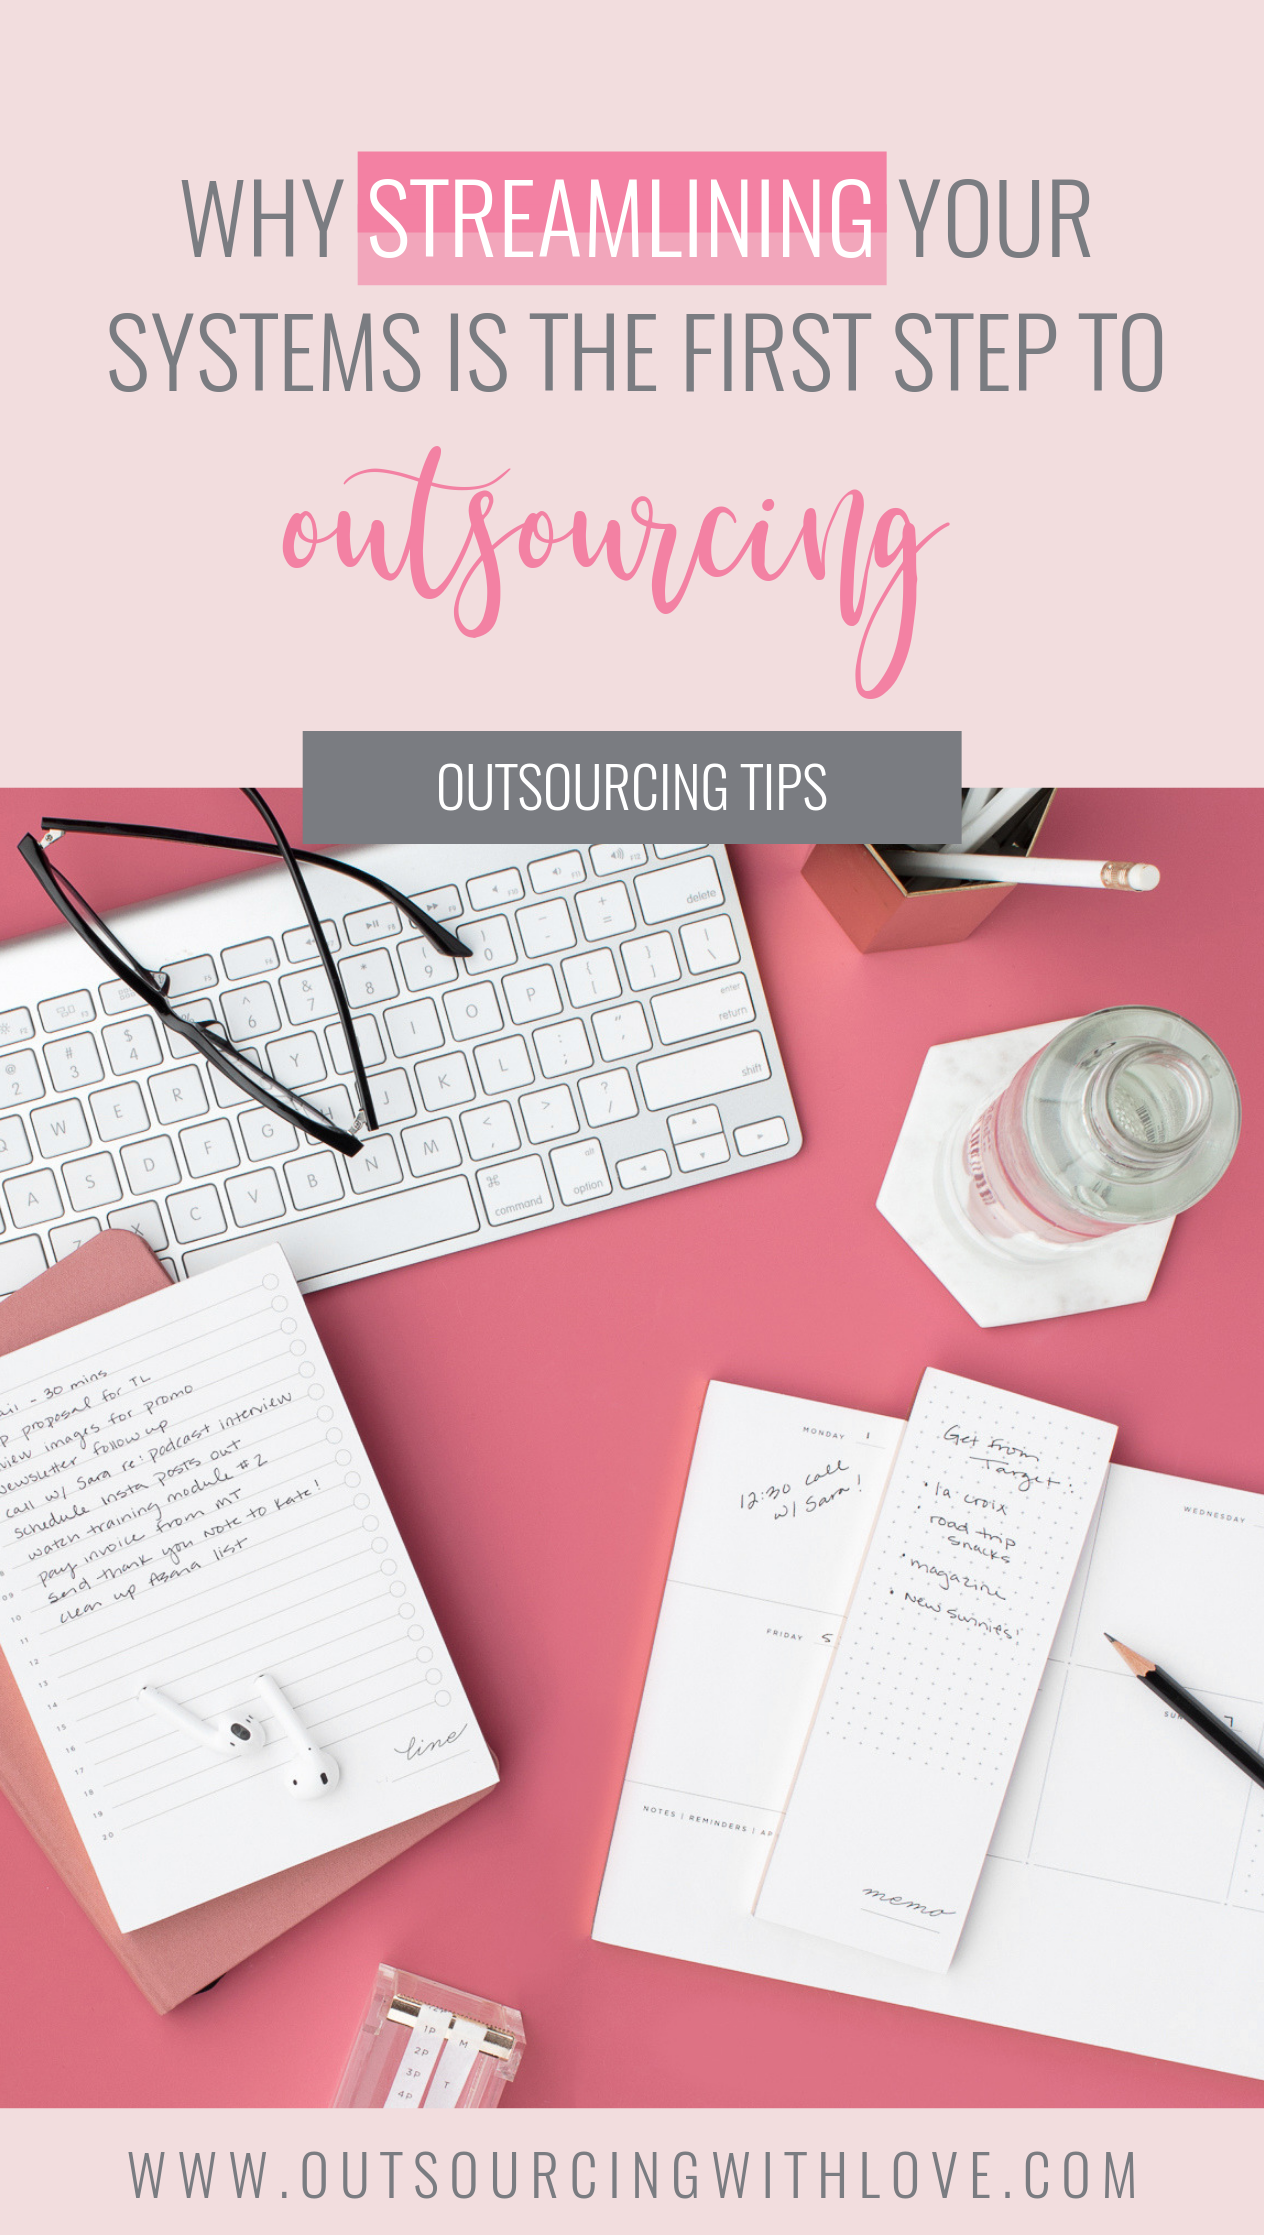 Why Streamlining Your Systems Is the First Step to Outsourcing // Sarah Hayes of Love & Spreadsheets for Outsourcing With Love #outsourcing #systems #business